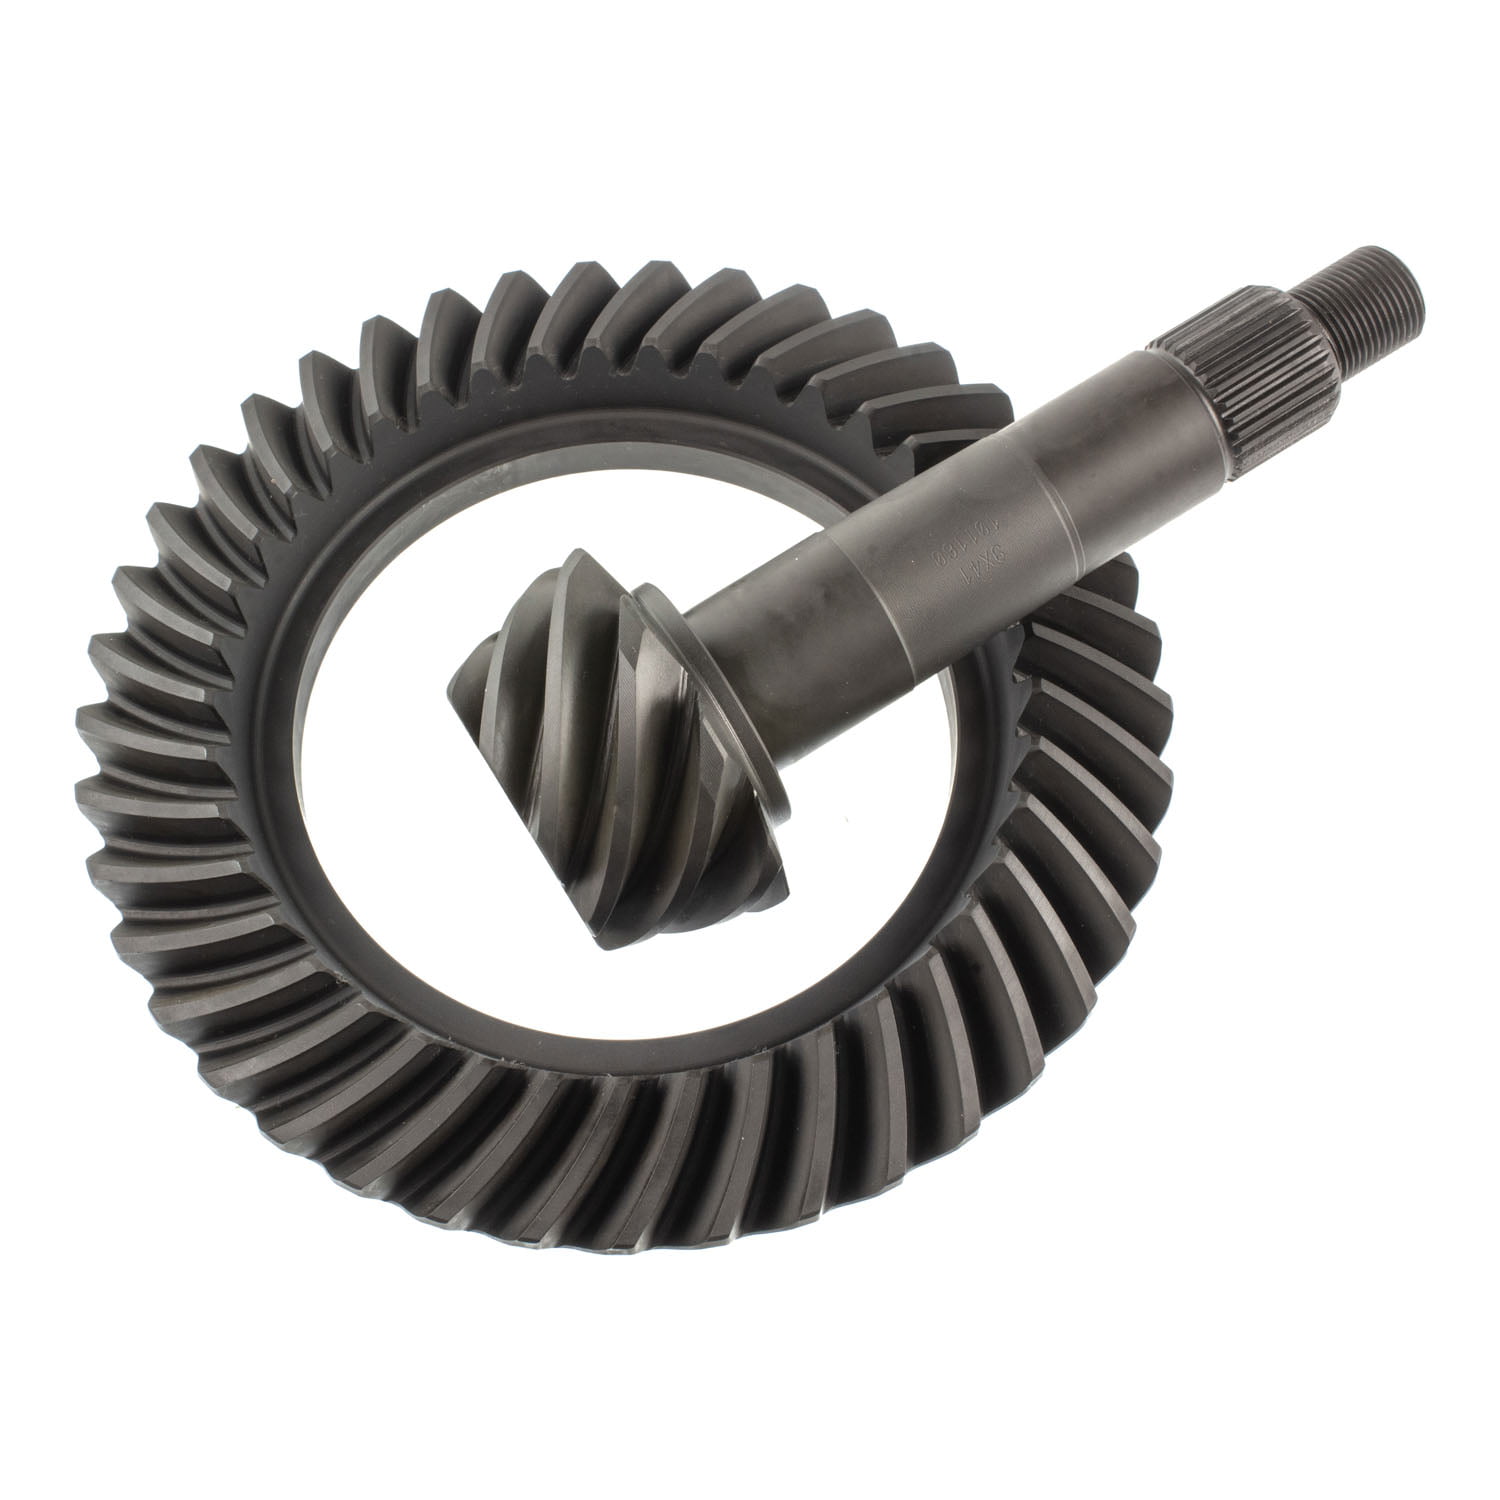 1 Pack Richmond Gear 69-0206-1 Ring and Pinion GM 8.875 4.56 Truck Ring Ratio 